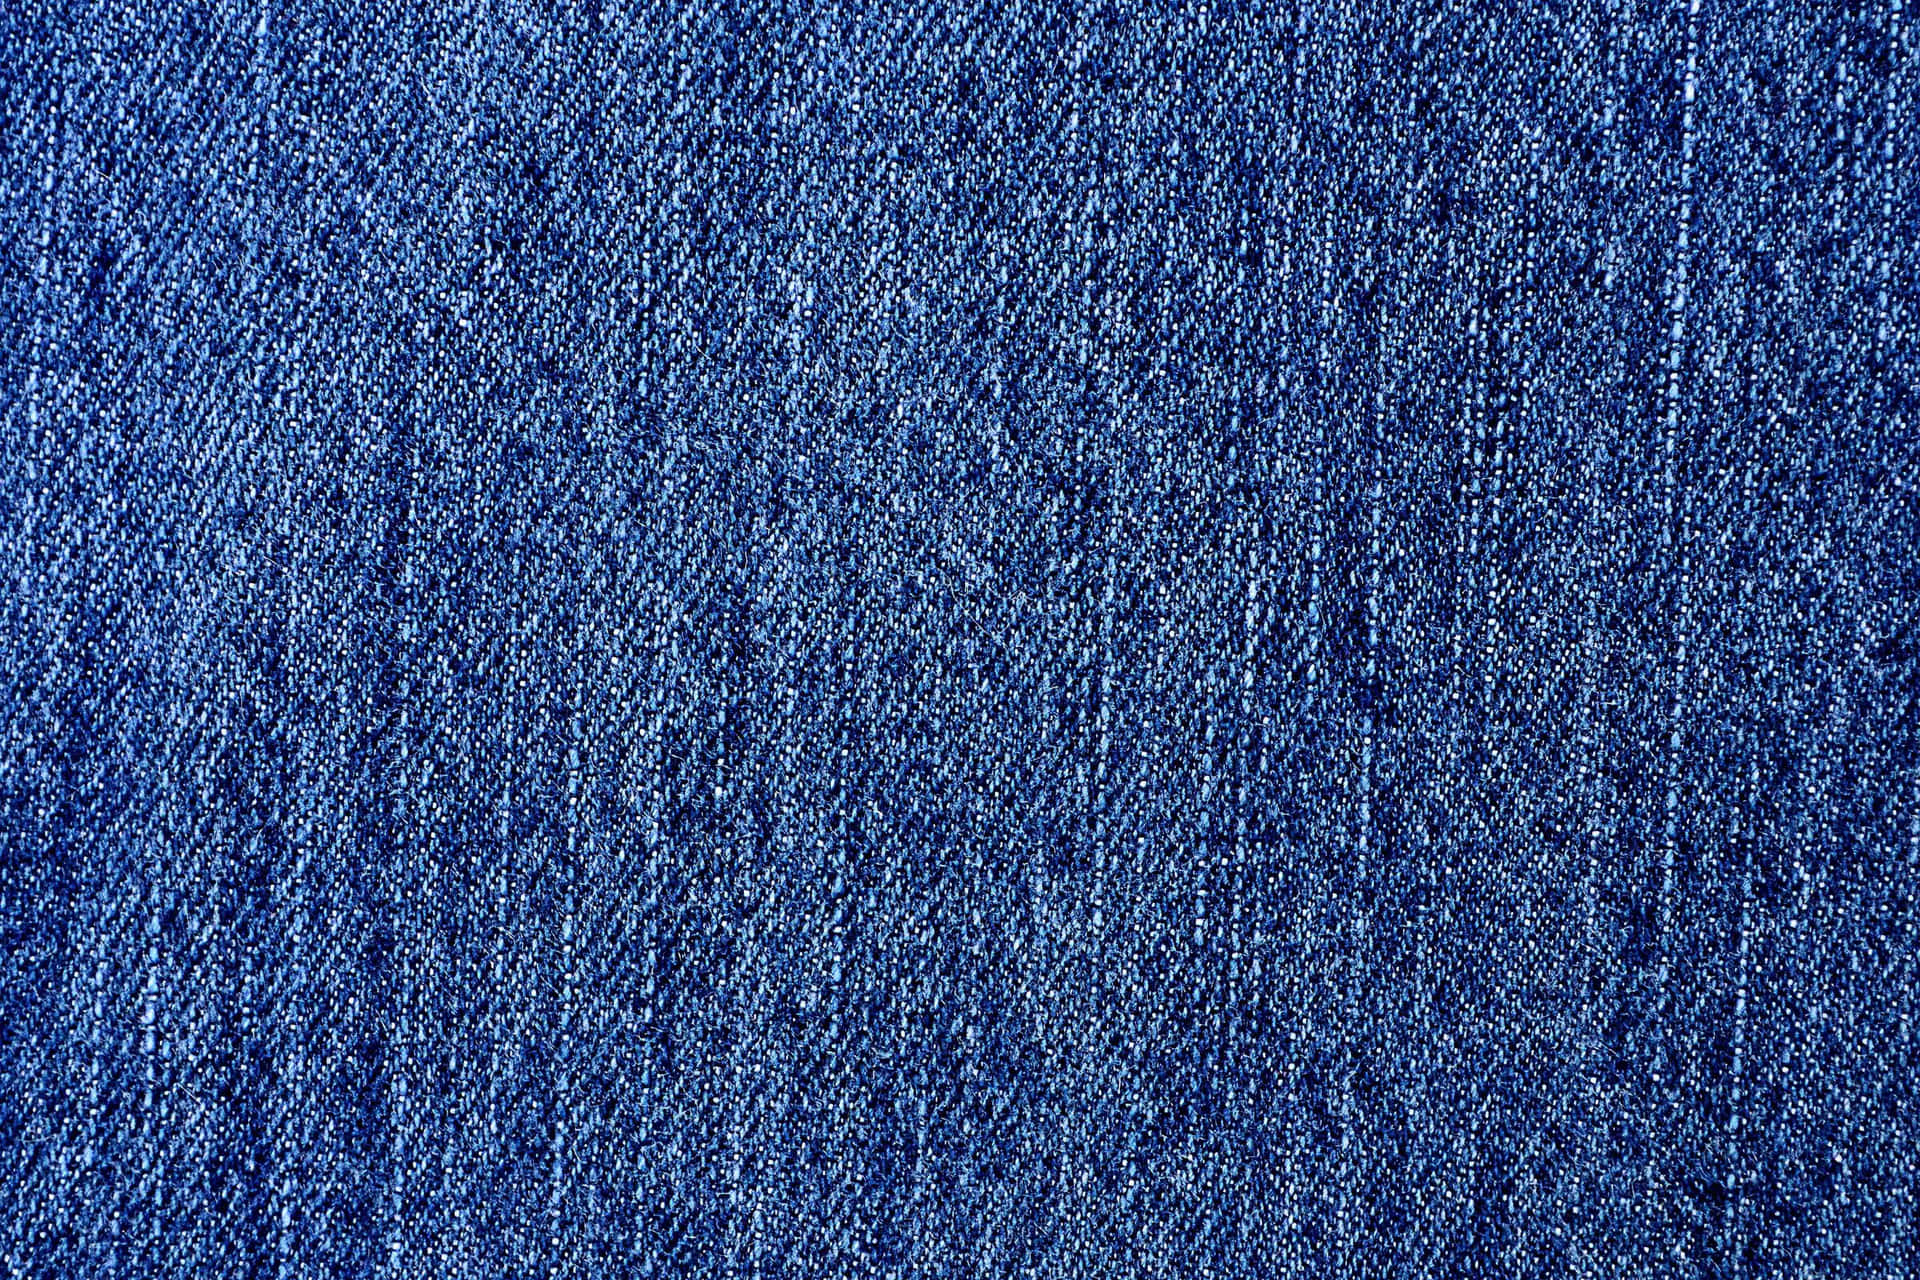 A close-up silhouette image of a pair of worn-in jeans.